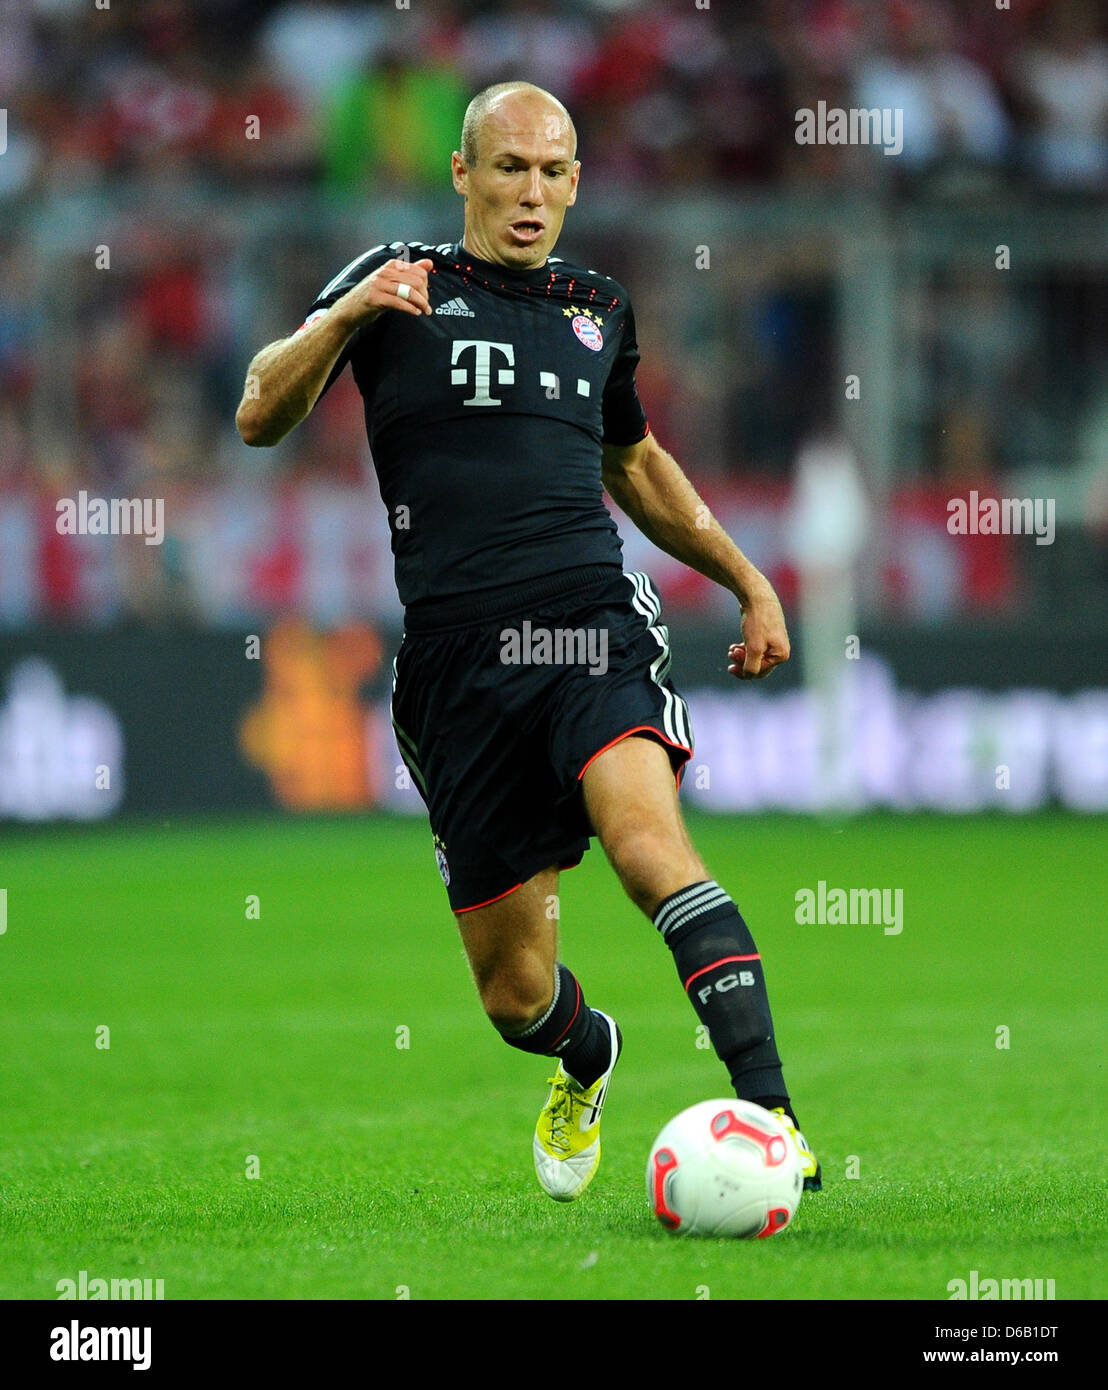 Munich's Arjen Robben plays the ball during the DFL Super Cup final match between FC Bayern Munich and Borussia Dortmund at the Allianz Arena in Munich, Germany, 12 August 2012. Photo: Thomas Eisenhuth Stock Photo